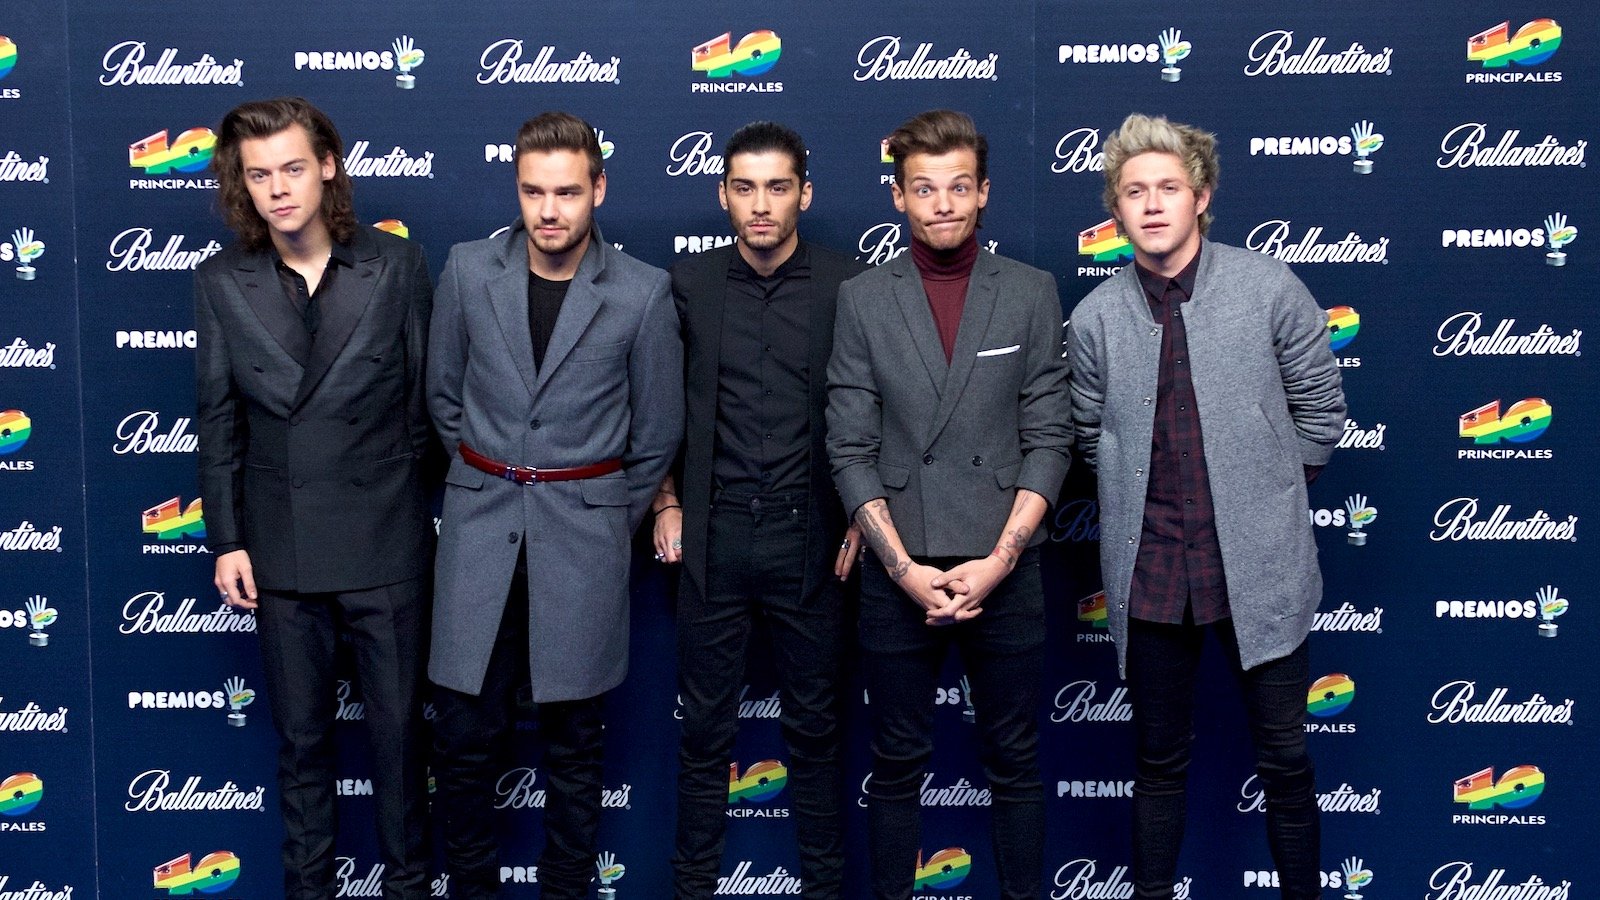 One Direction at the 40 Principales Awards in 2013: Harry Styles, Liam Payne, Zayn Malik, Louis Tomlinson, Niall Horan